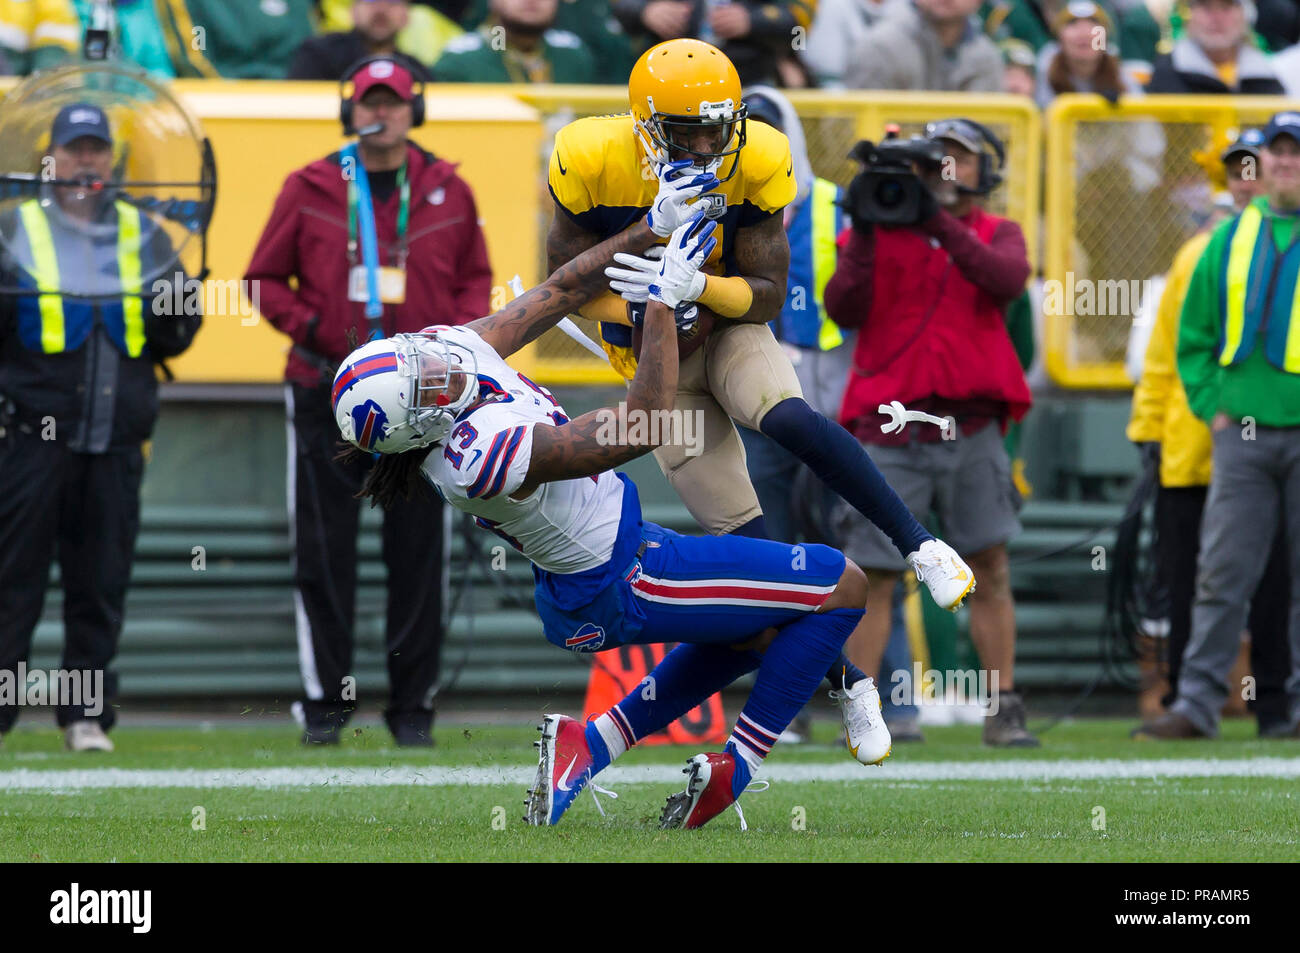 Green Bay, WI, USA. 30th Sep, 2018. Green Bay Packers defensive back Ha Ha Clinton-Dix #21 intercepts a pass while colliding with Buffalo Bills wide receiver Kelvin Benjamin #13 during the NFL Football game between the Buffalo Bills and the Green Bay Packers at Lambeau Field in Green Bay, WI. John Fisher/CSM/Alamy Live News Stock Photo